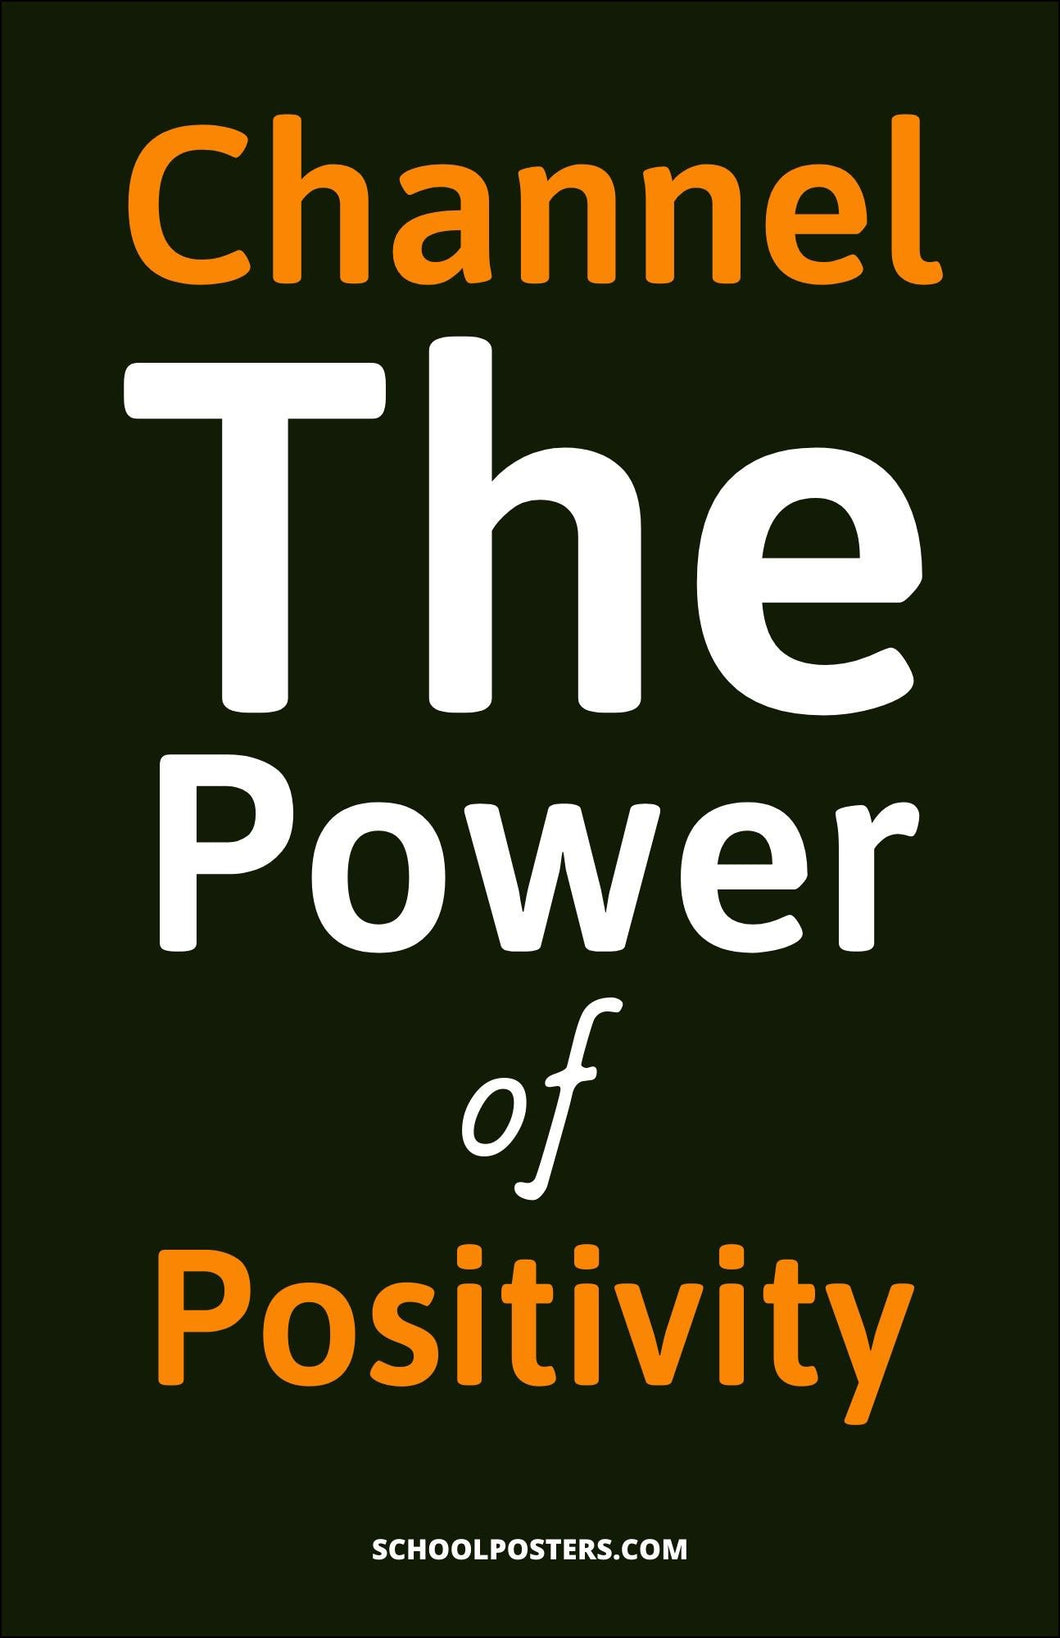 Channel The Power of Positivity Poster